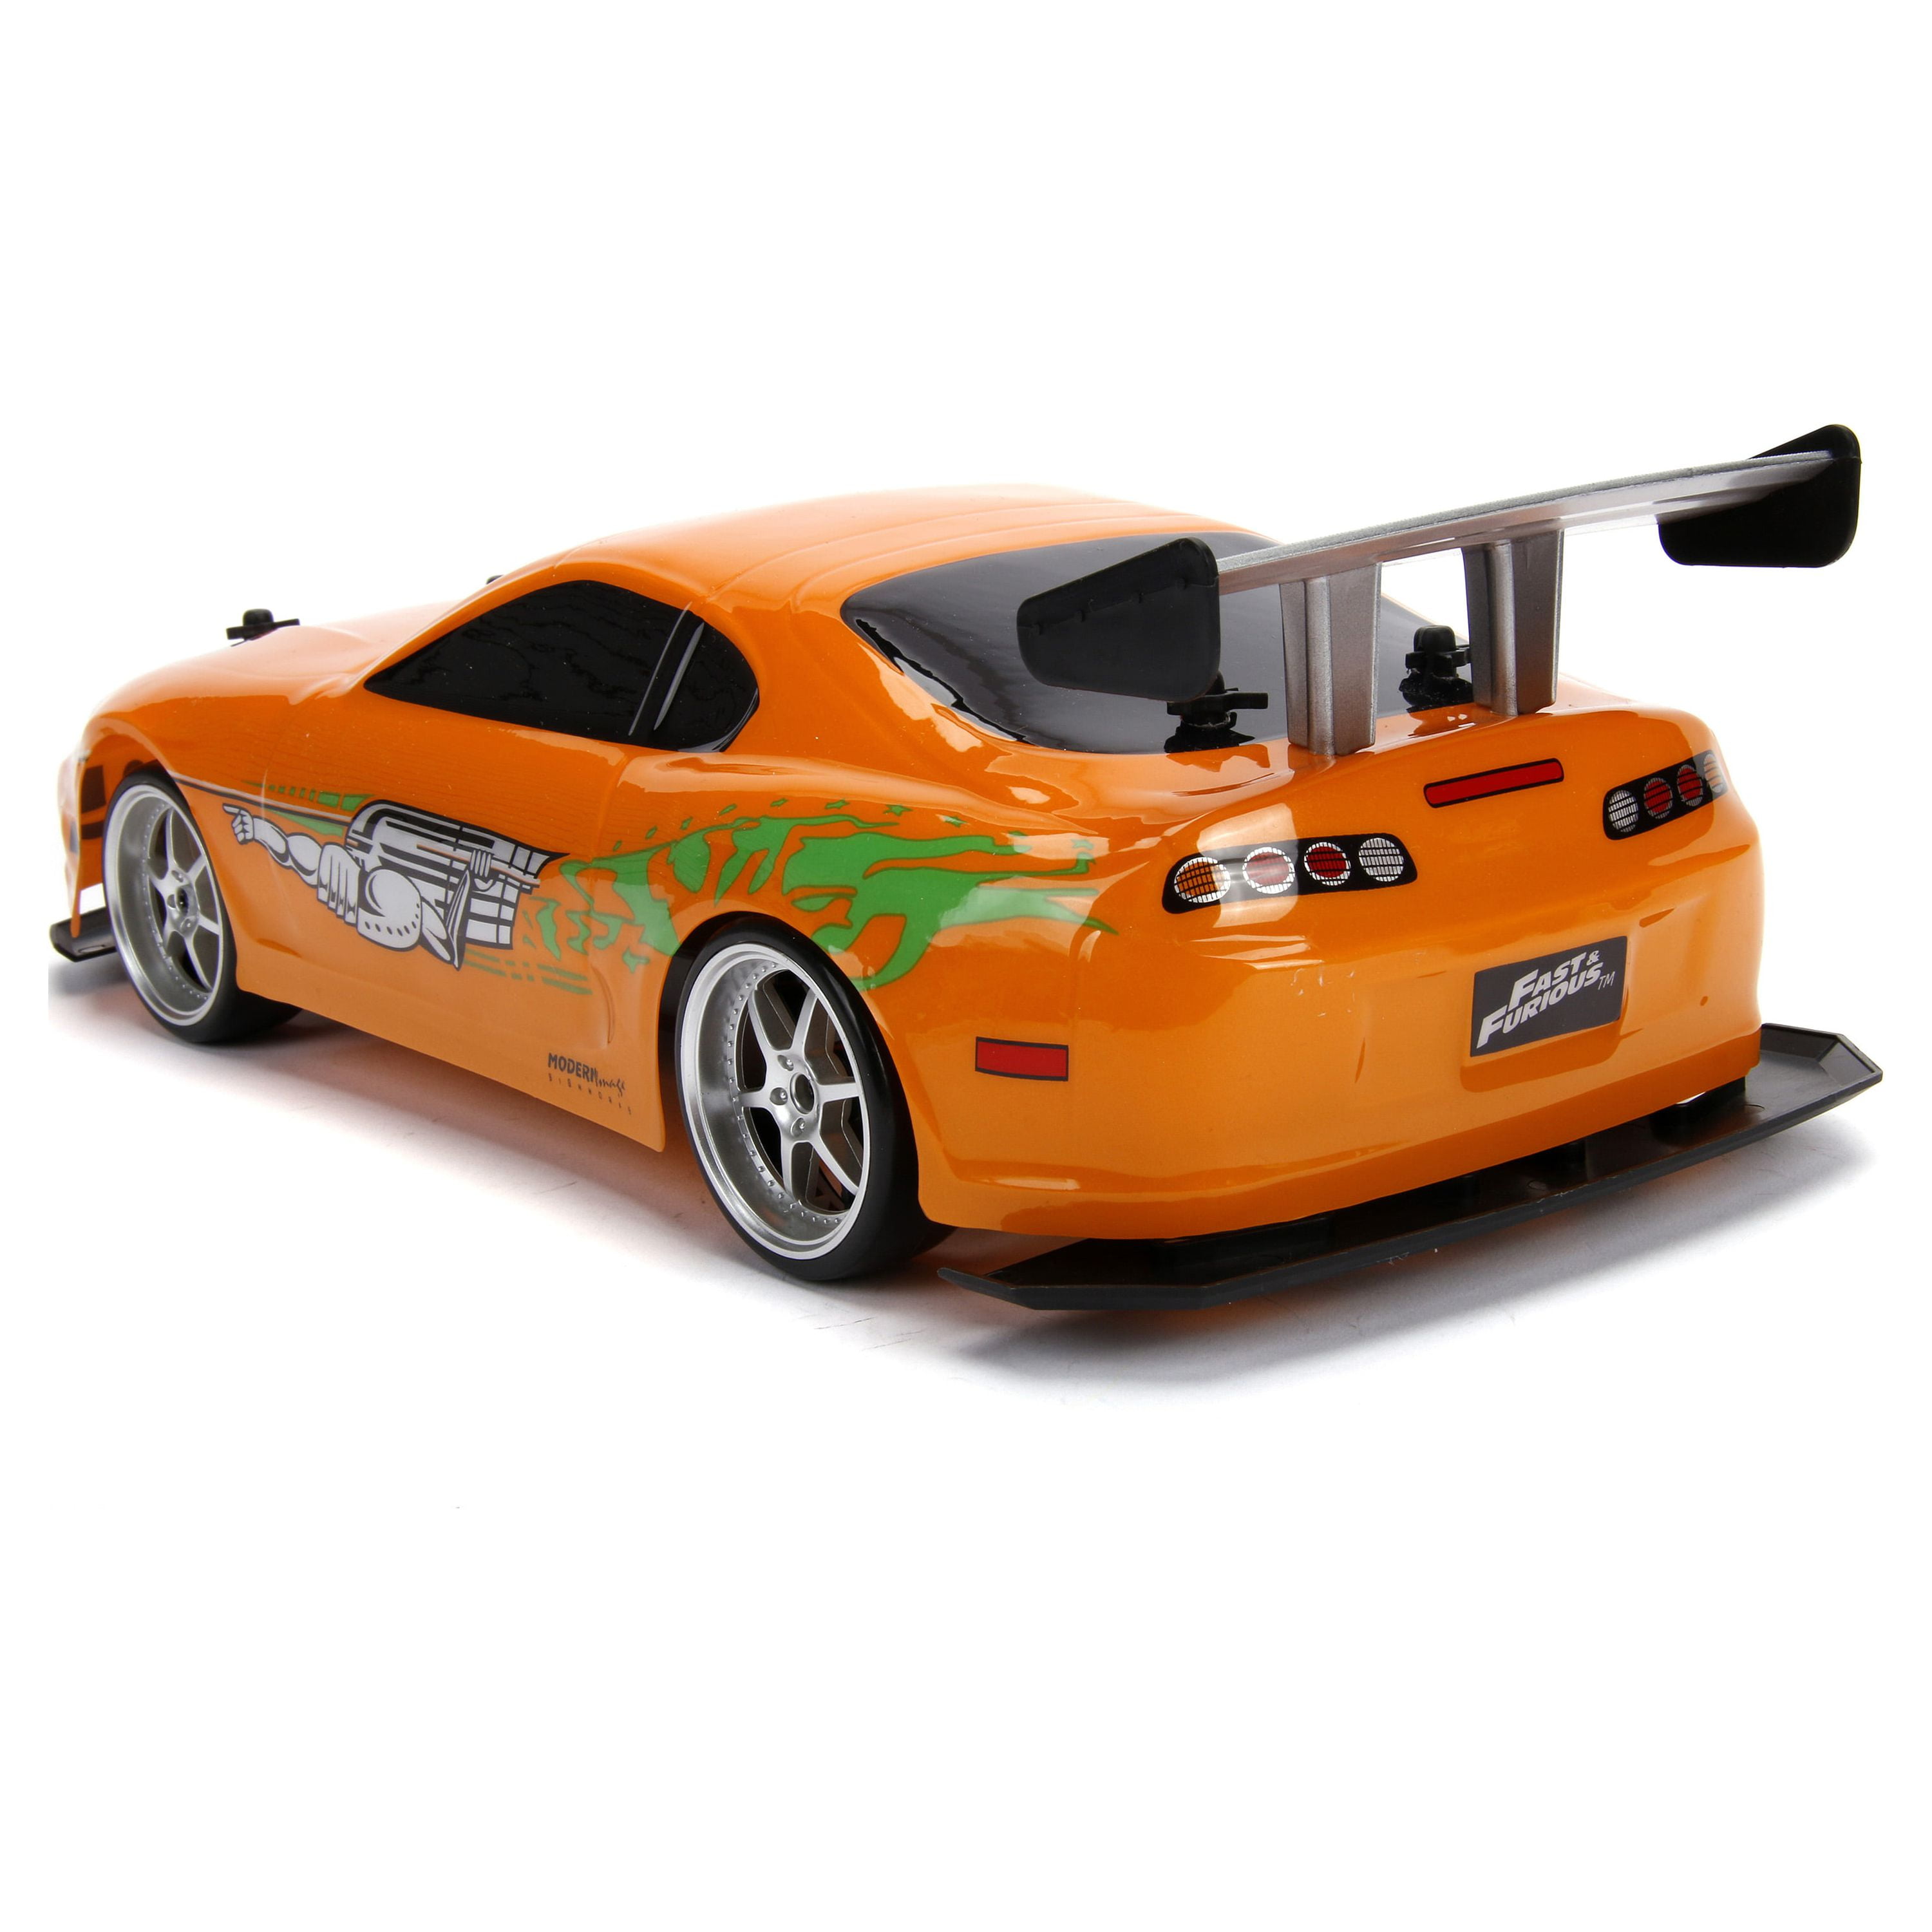 Fast And Furious Rc Drift Cars for Sale in Sacramento, CA - OfferUp